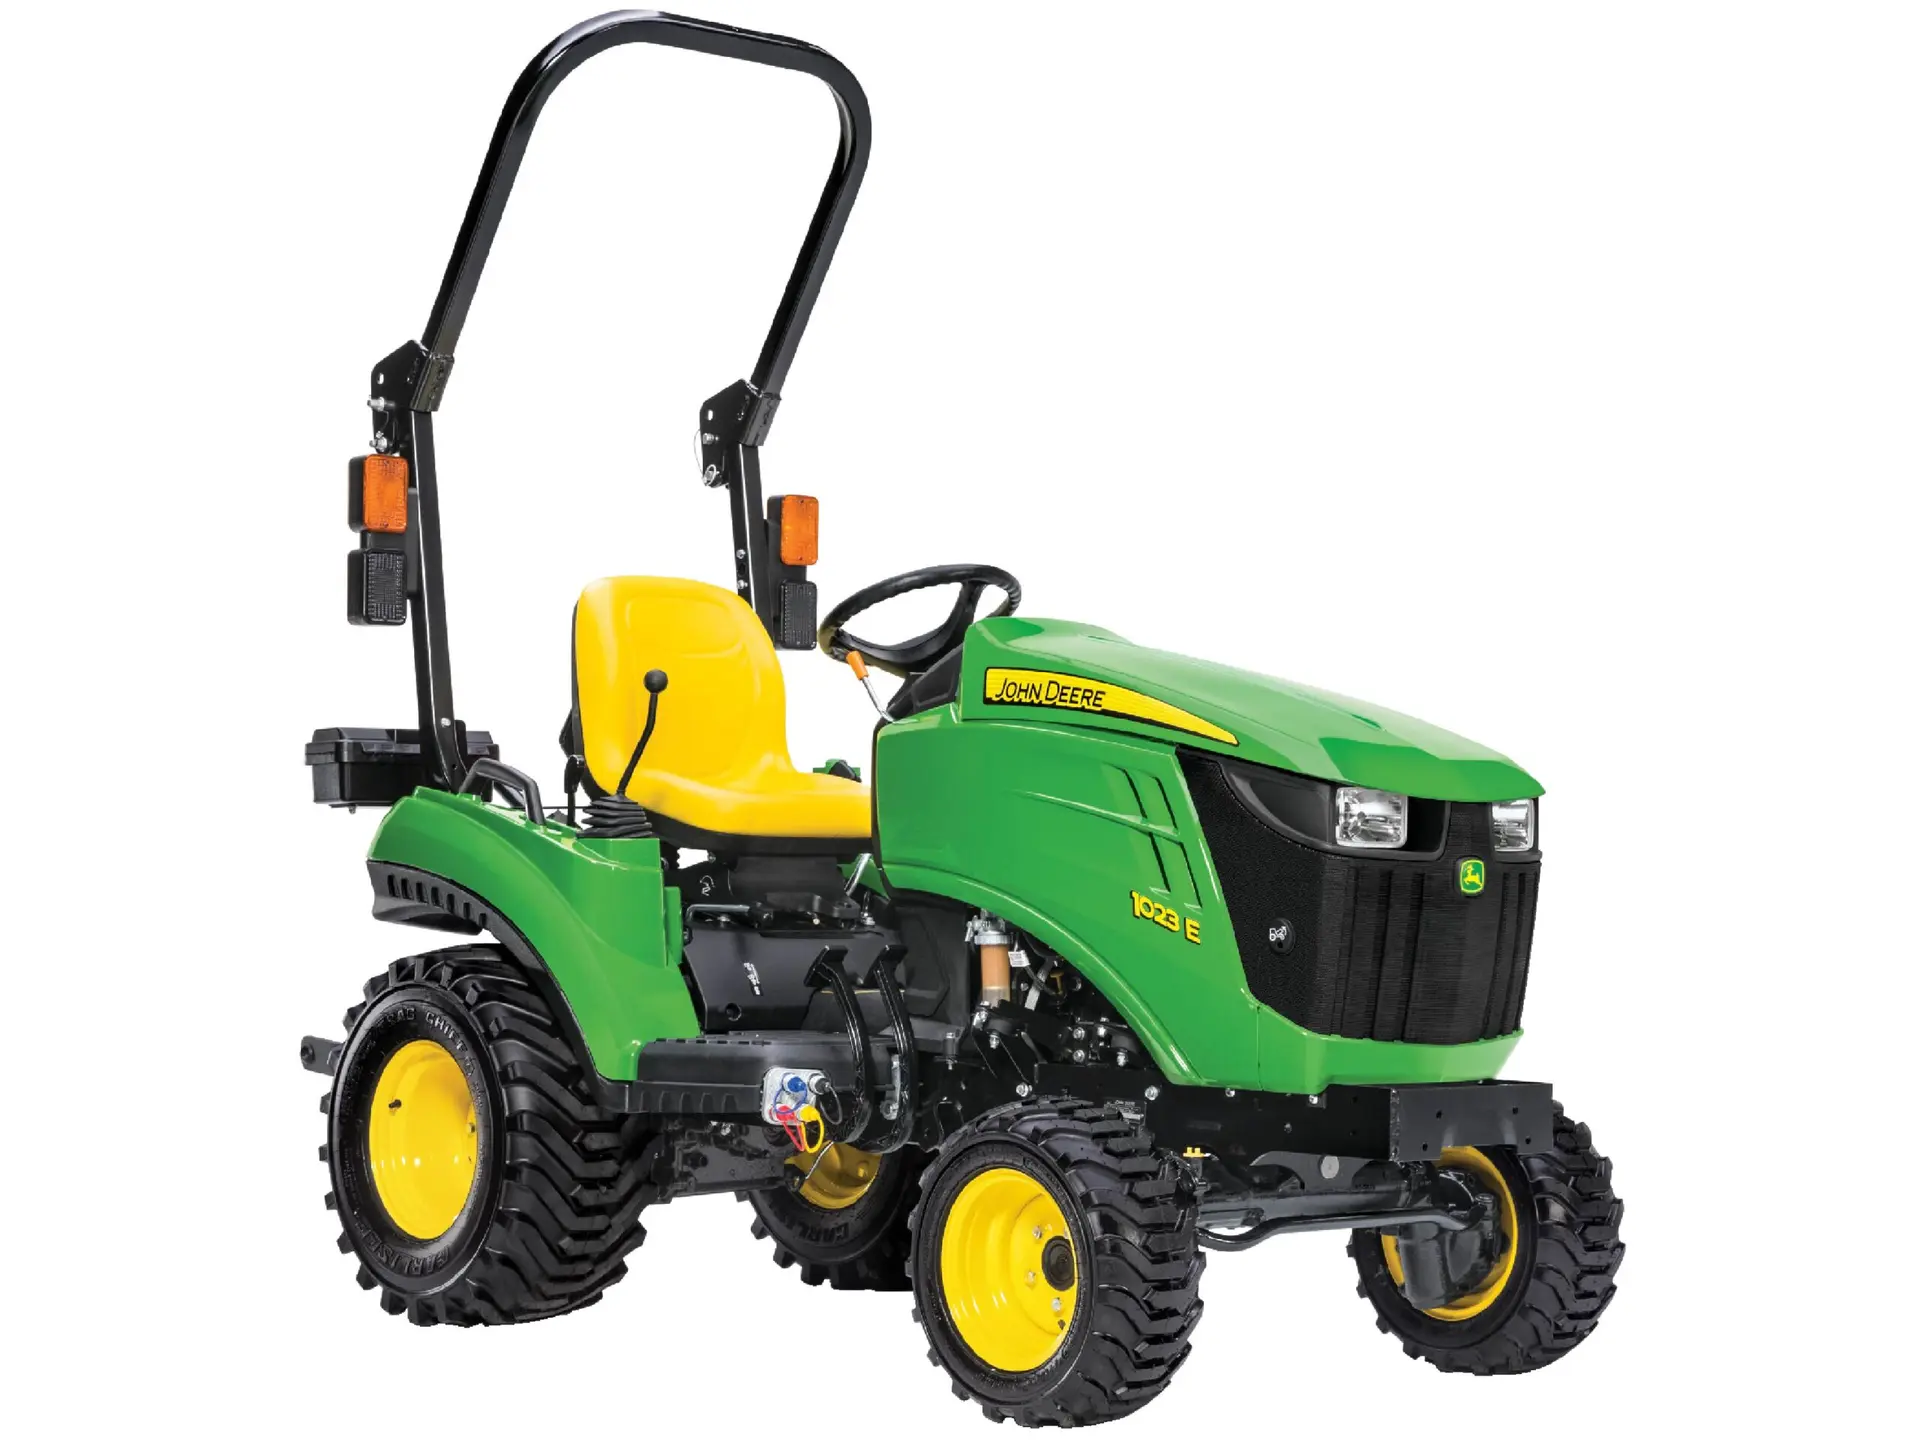 1000 Series Sub-Compact Utility Tractors